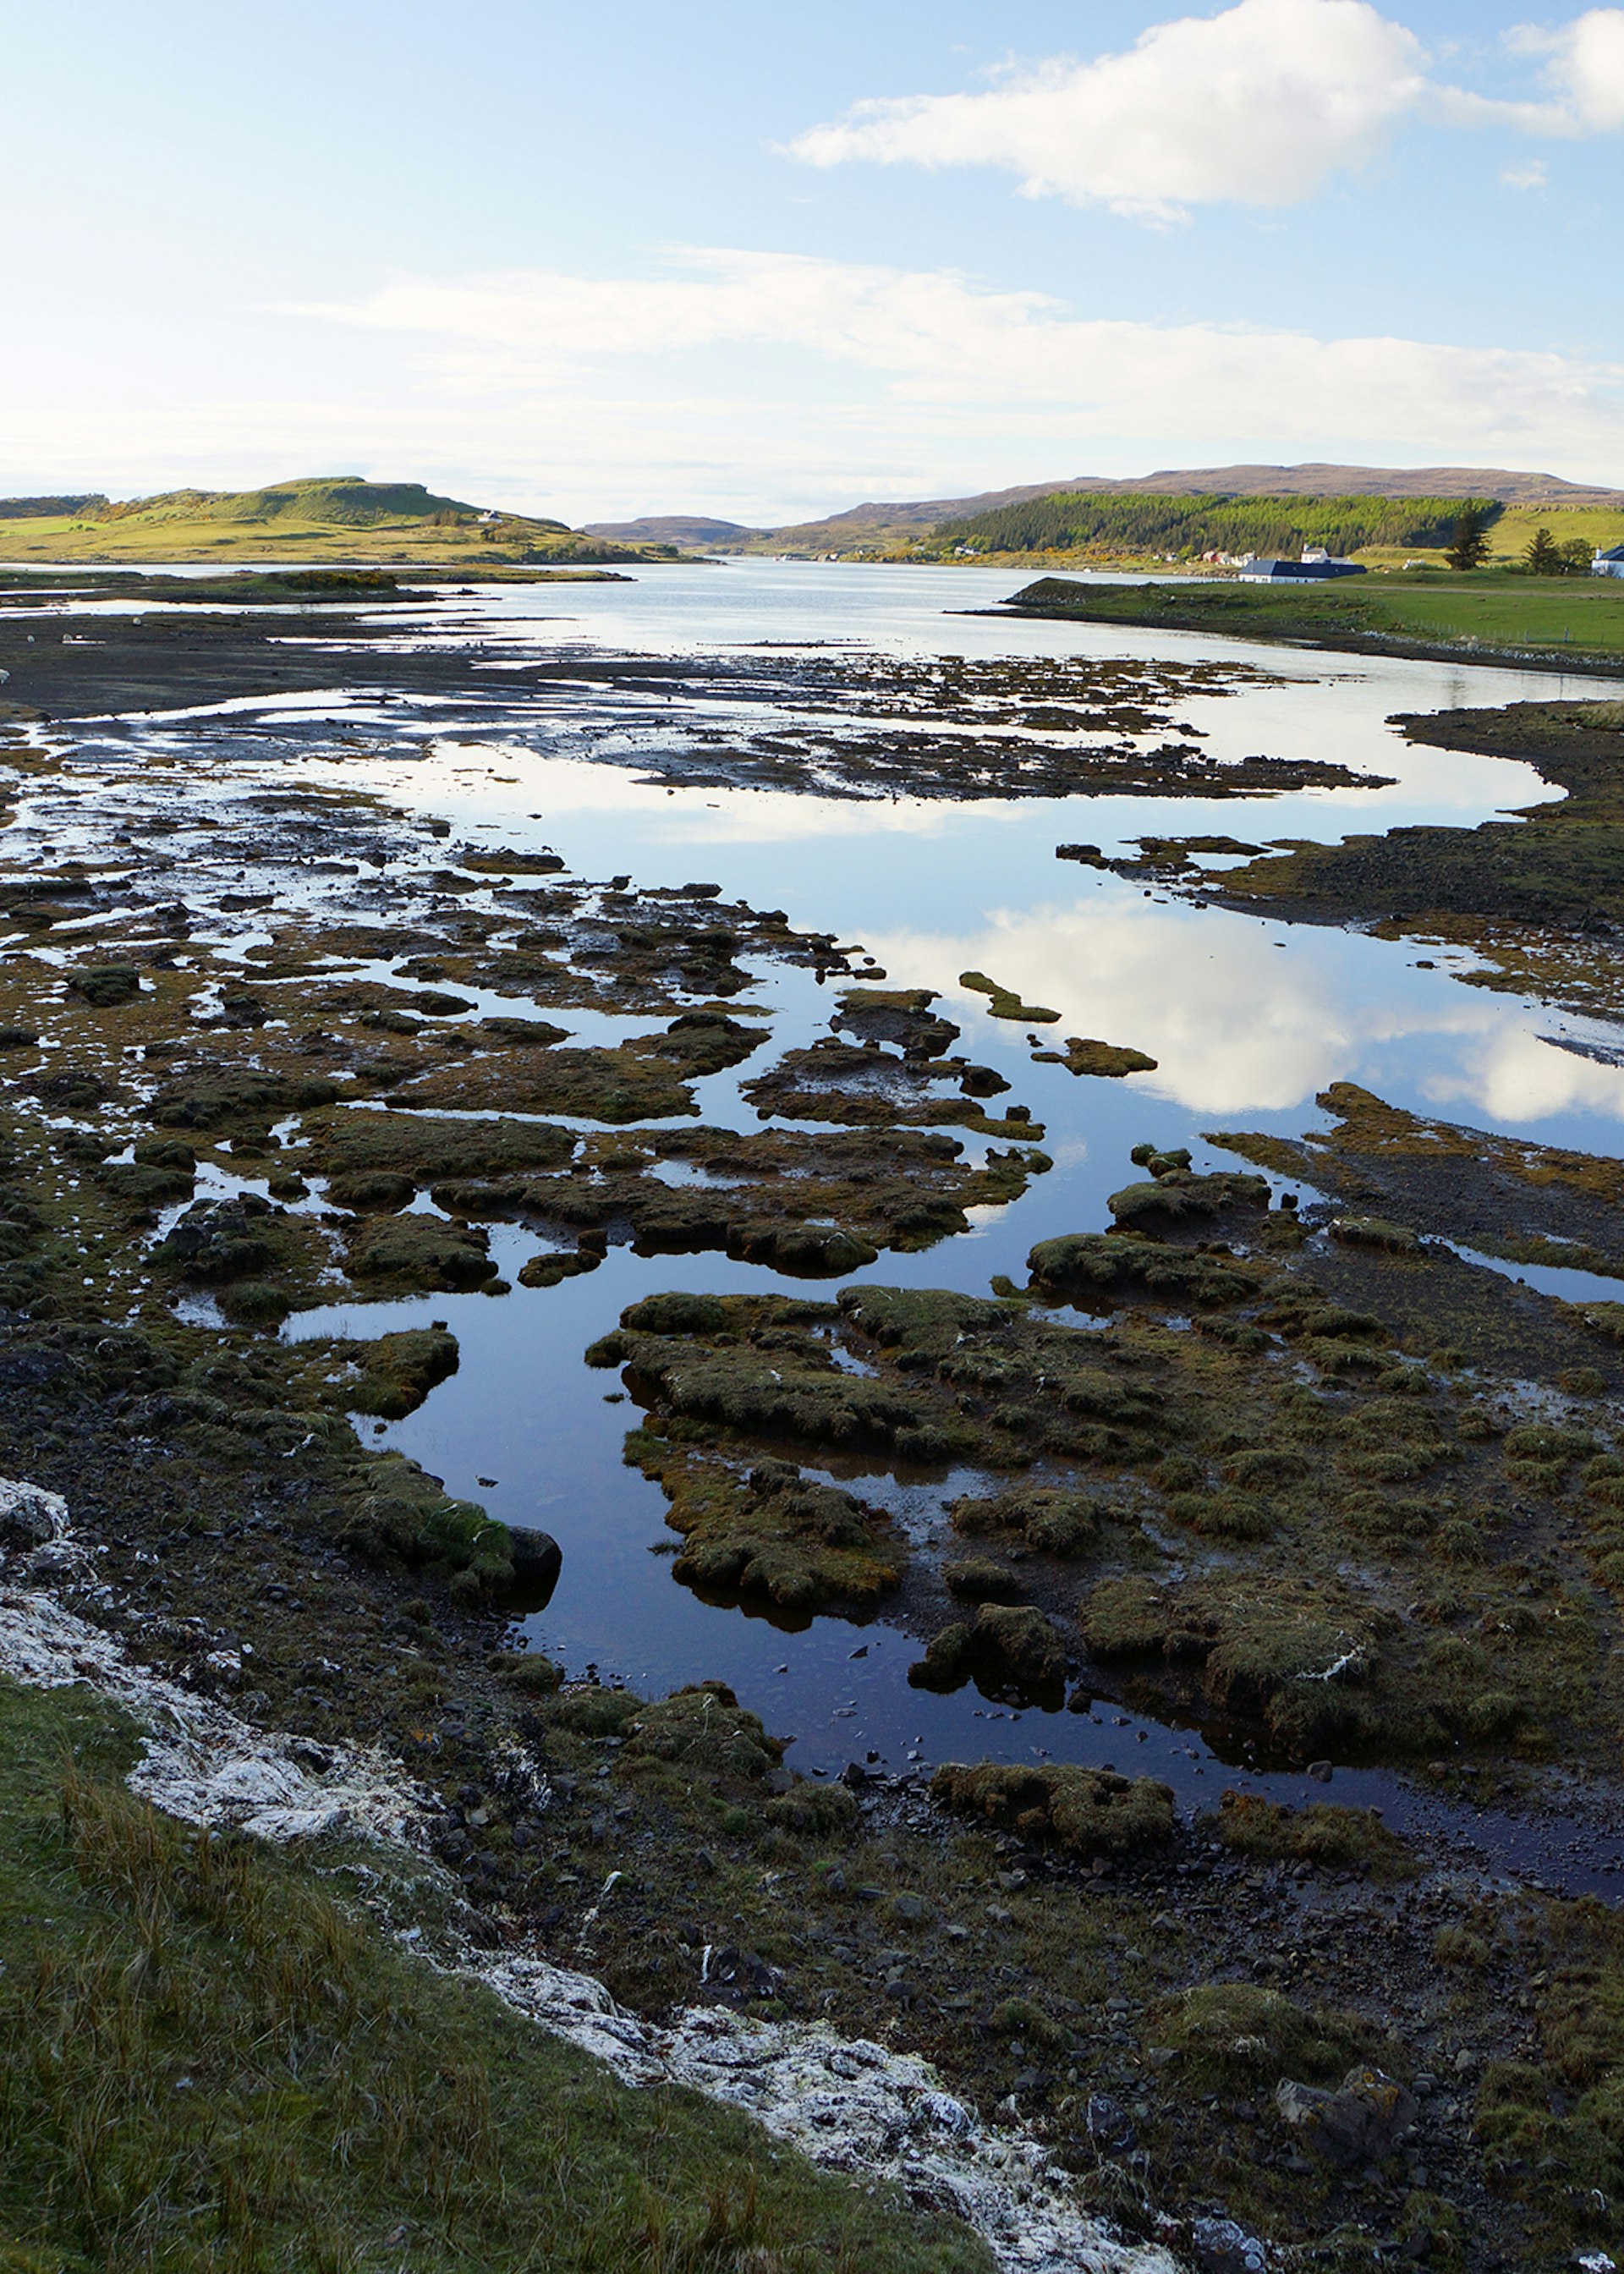 An inlet of Loch Dunvegan seen from the road to Colbost, Isle of Skye © James Kay / Lonely Planet